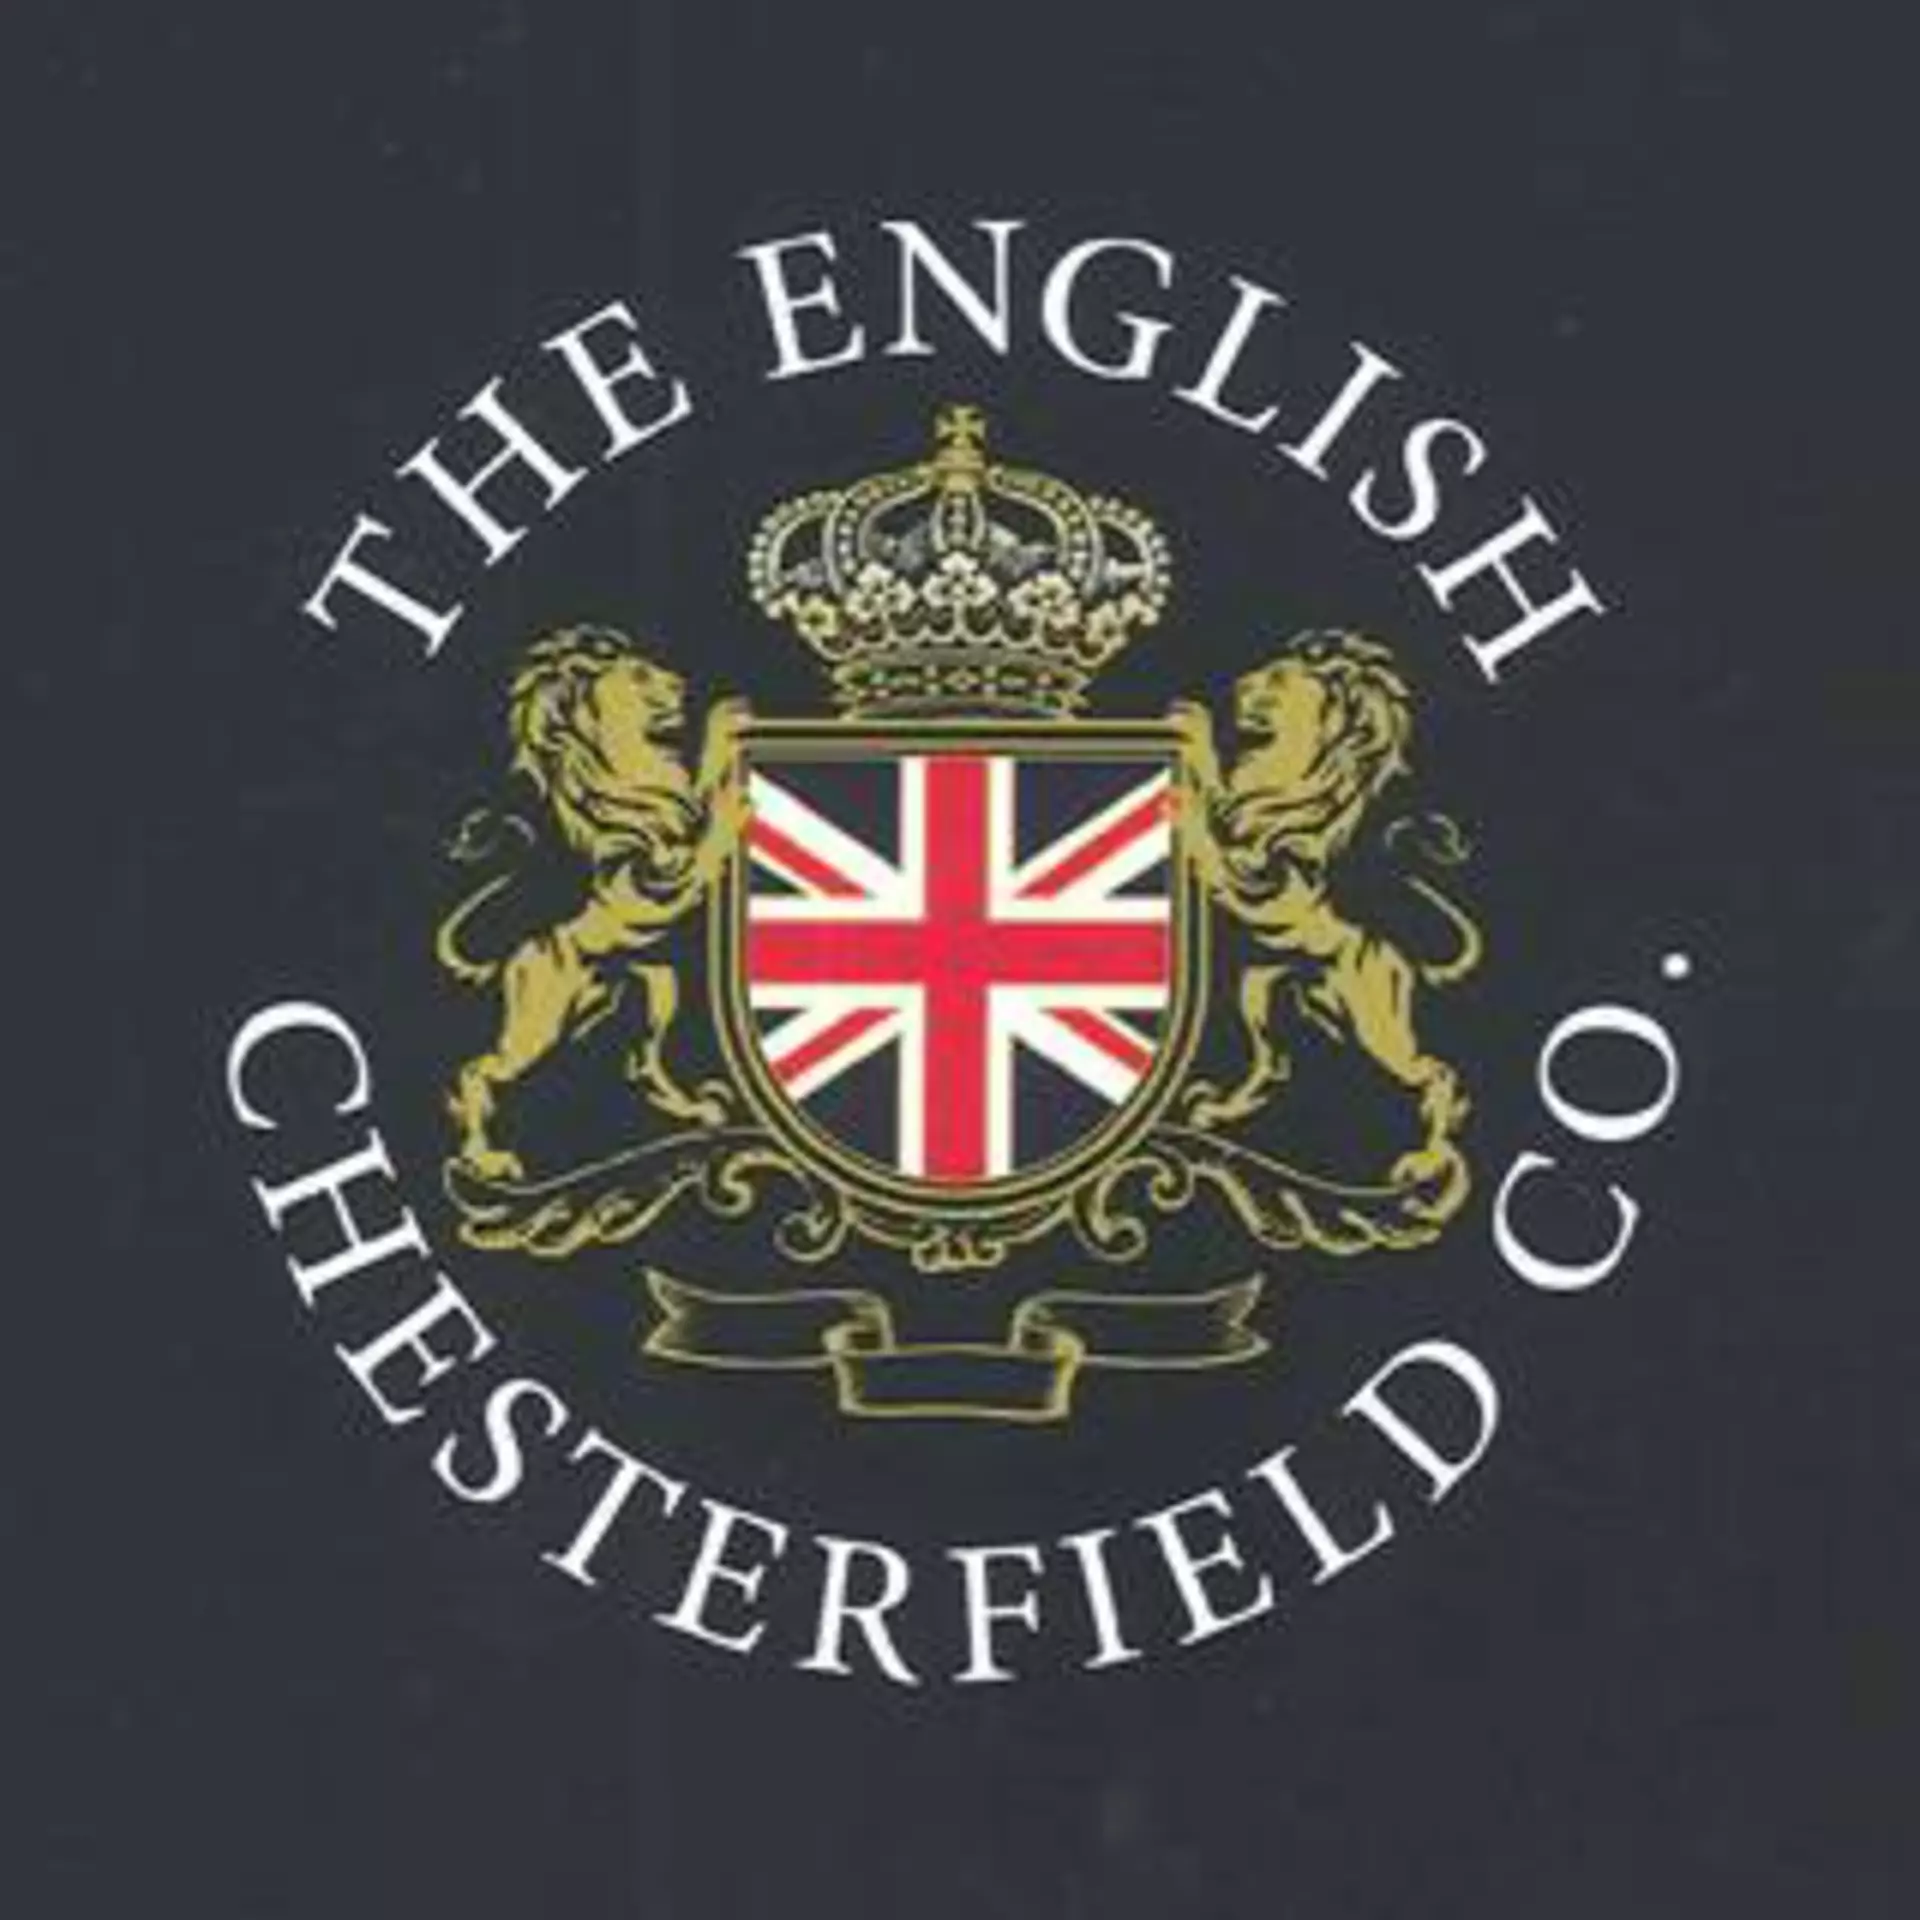 Logo "the English Chesterfield Co."